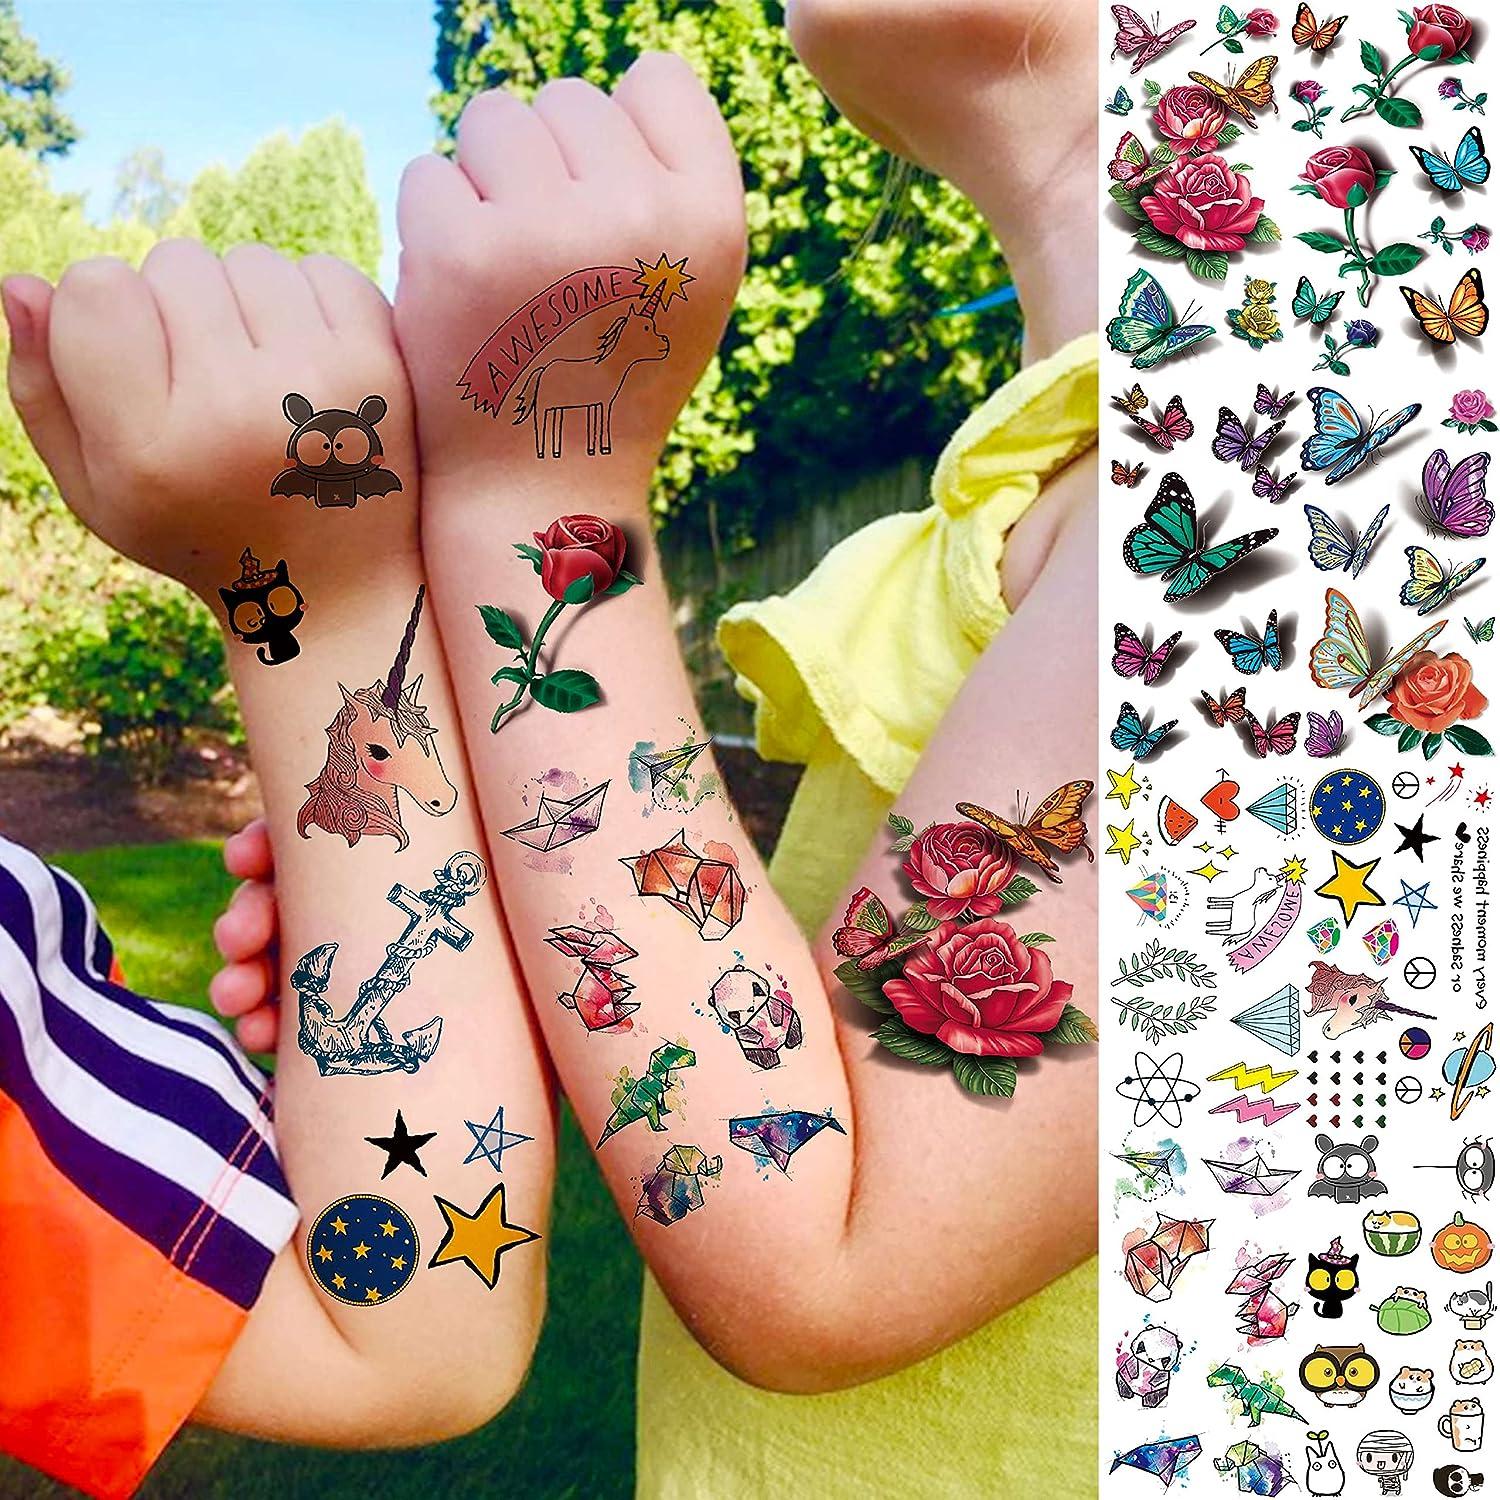 Realistic Black Halloween Spider Halloween Fake Tattoos For Kids DIY Small  Stickers With Scarecrow And Skull Design 230926 From Bian04, $2.81 |  DHgate.Com